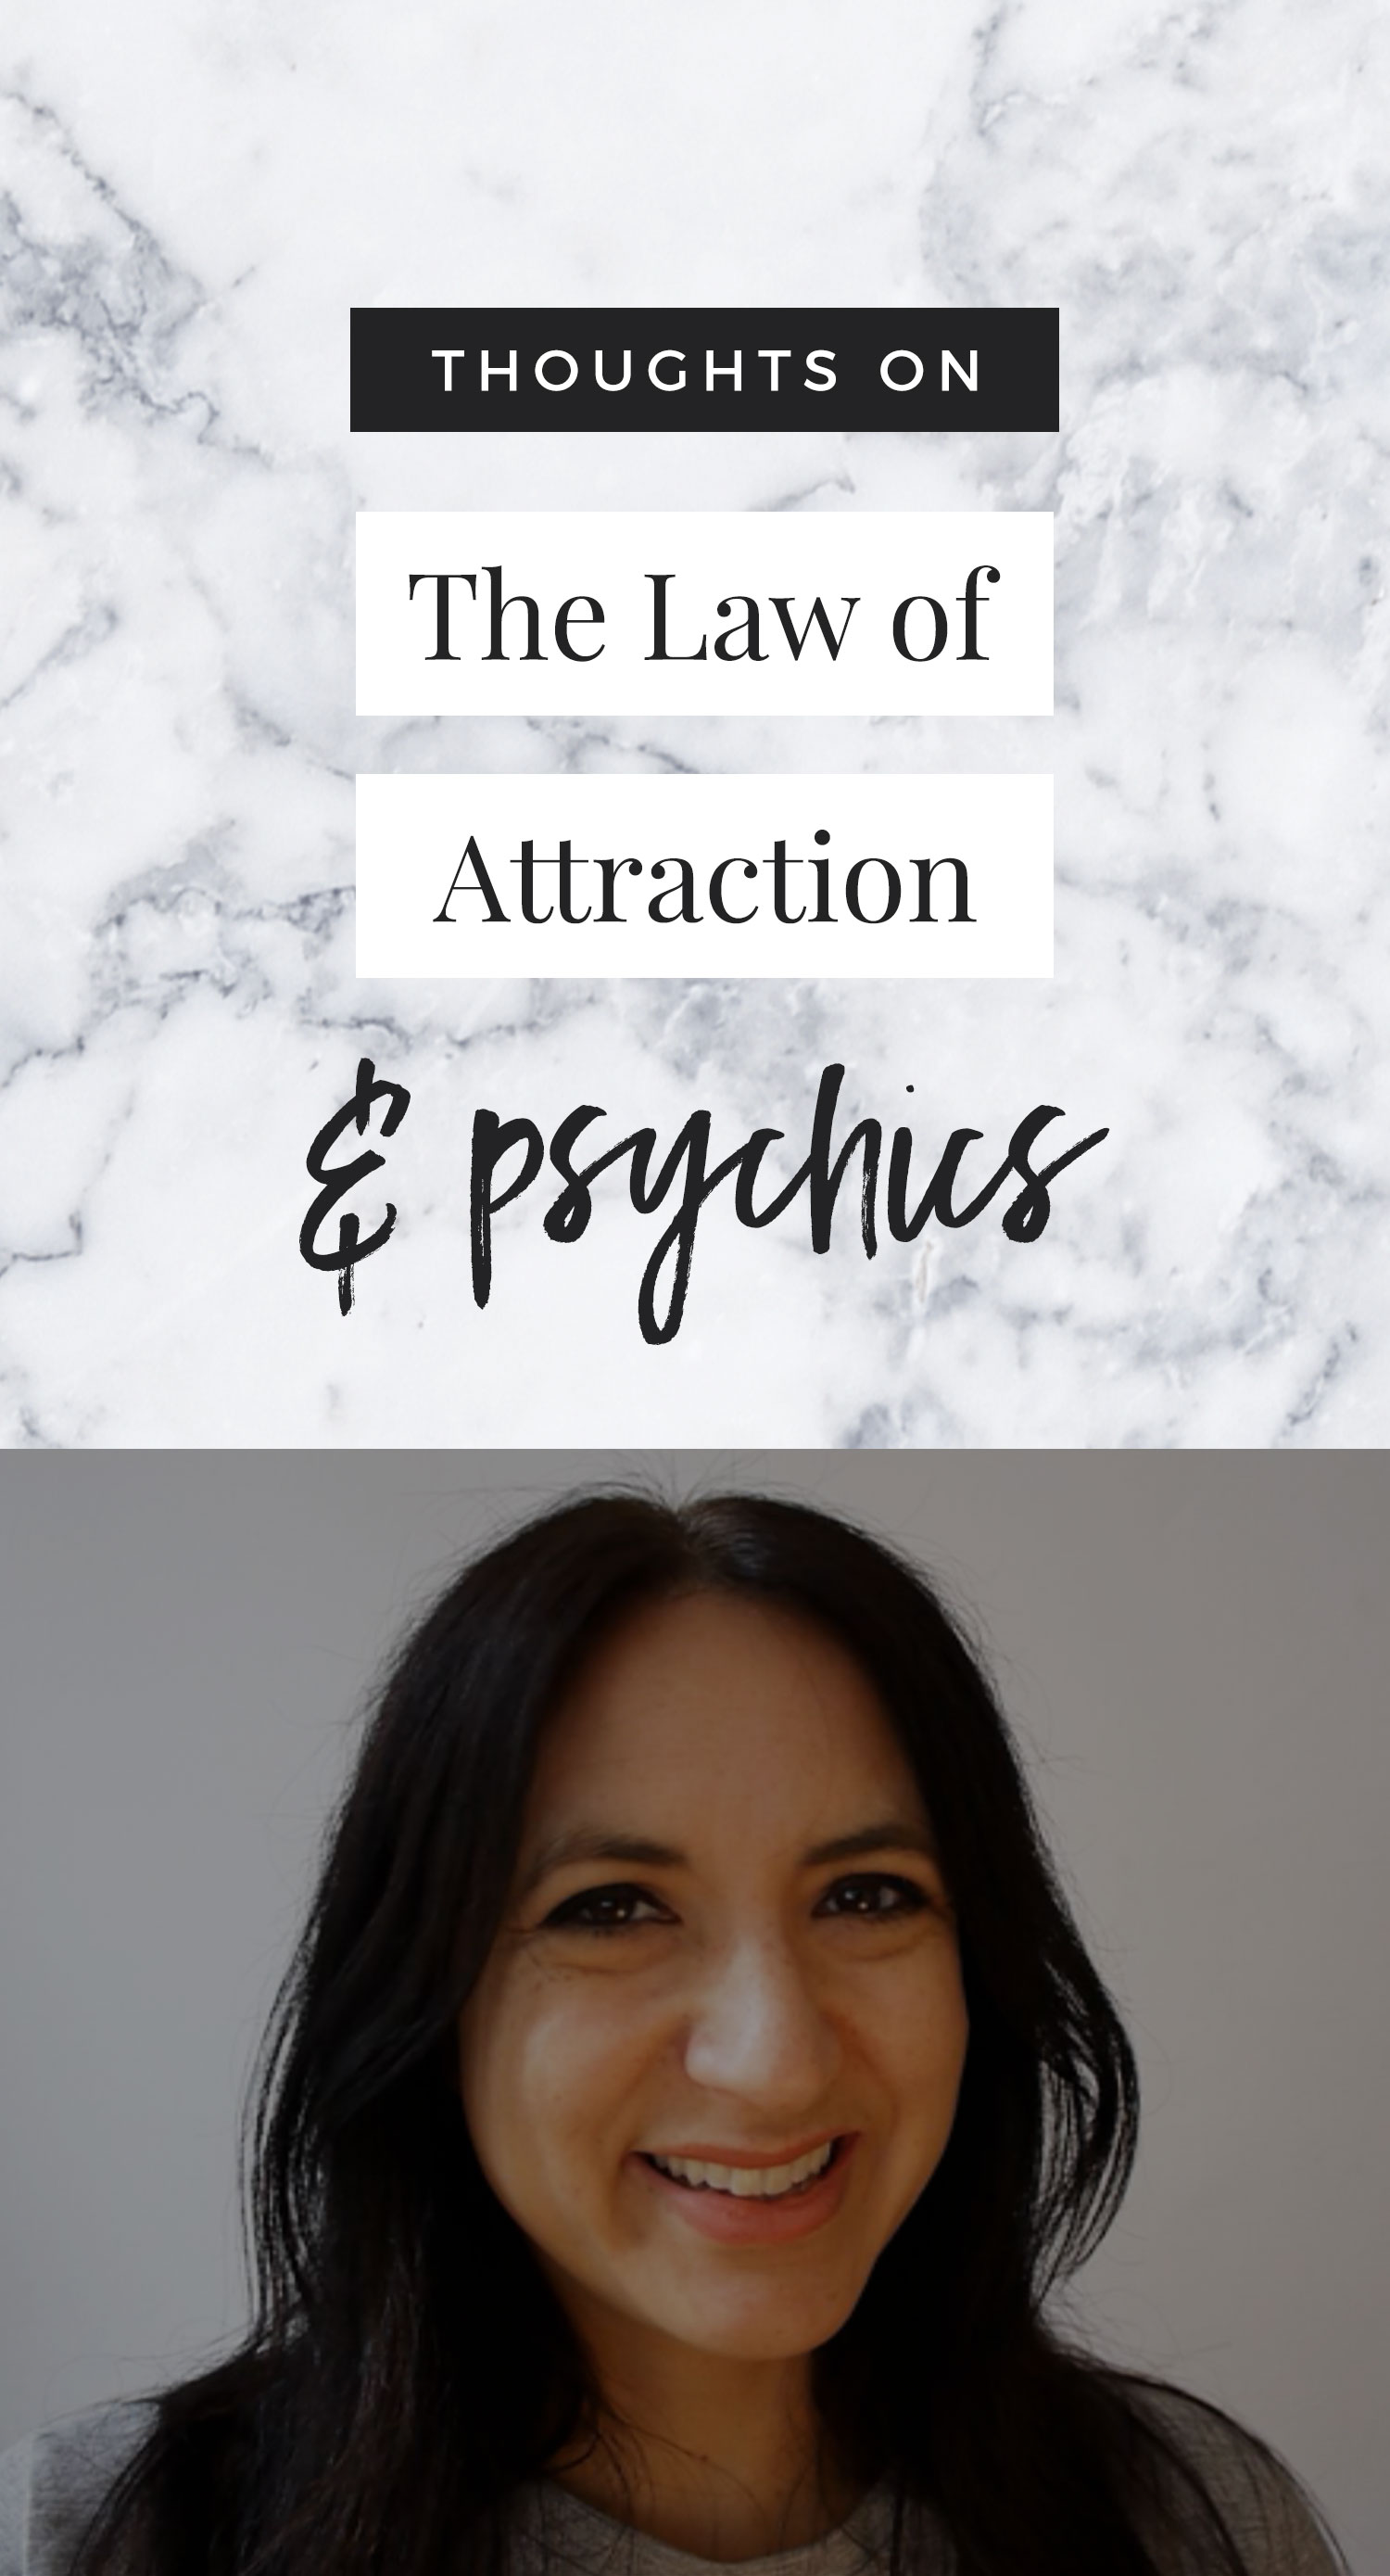 The Law of Attraction & Psychics